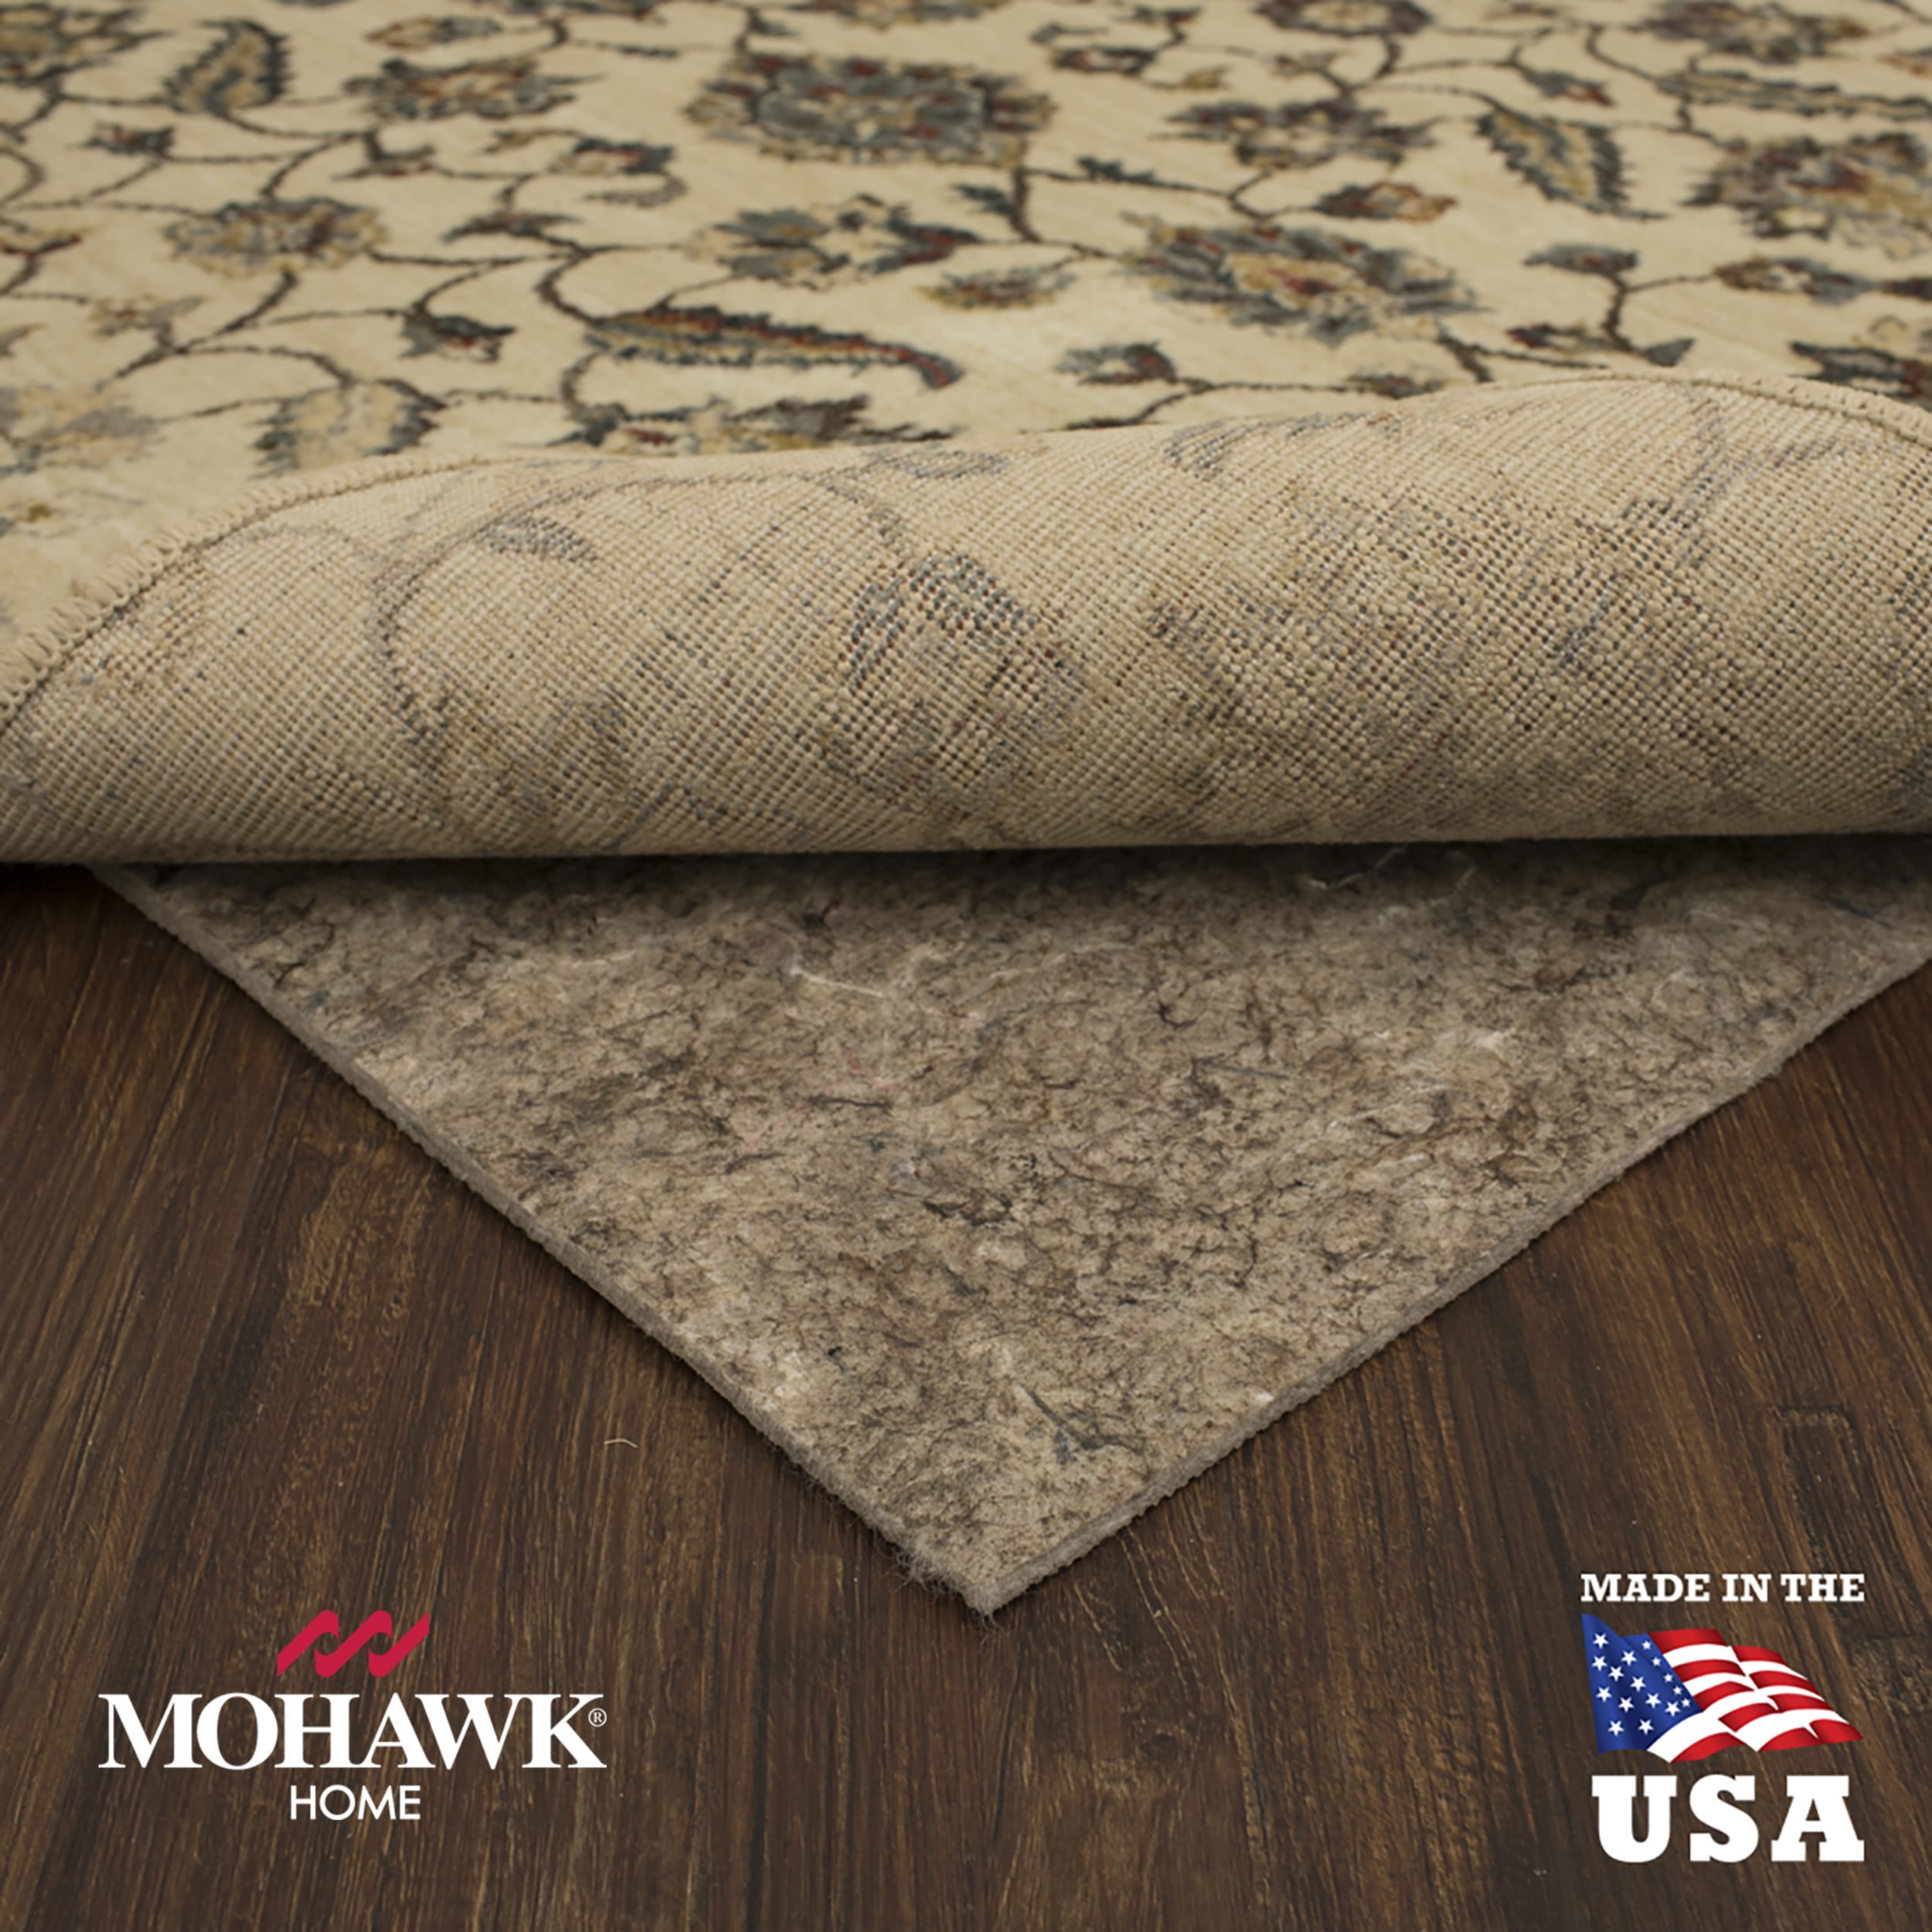 Mohawk Home Rug Grip Tape - Natural, 10 x 20 in - Fred Meyer